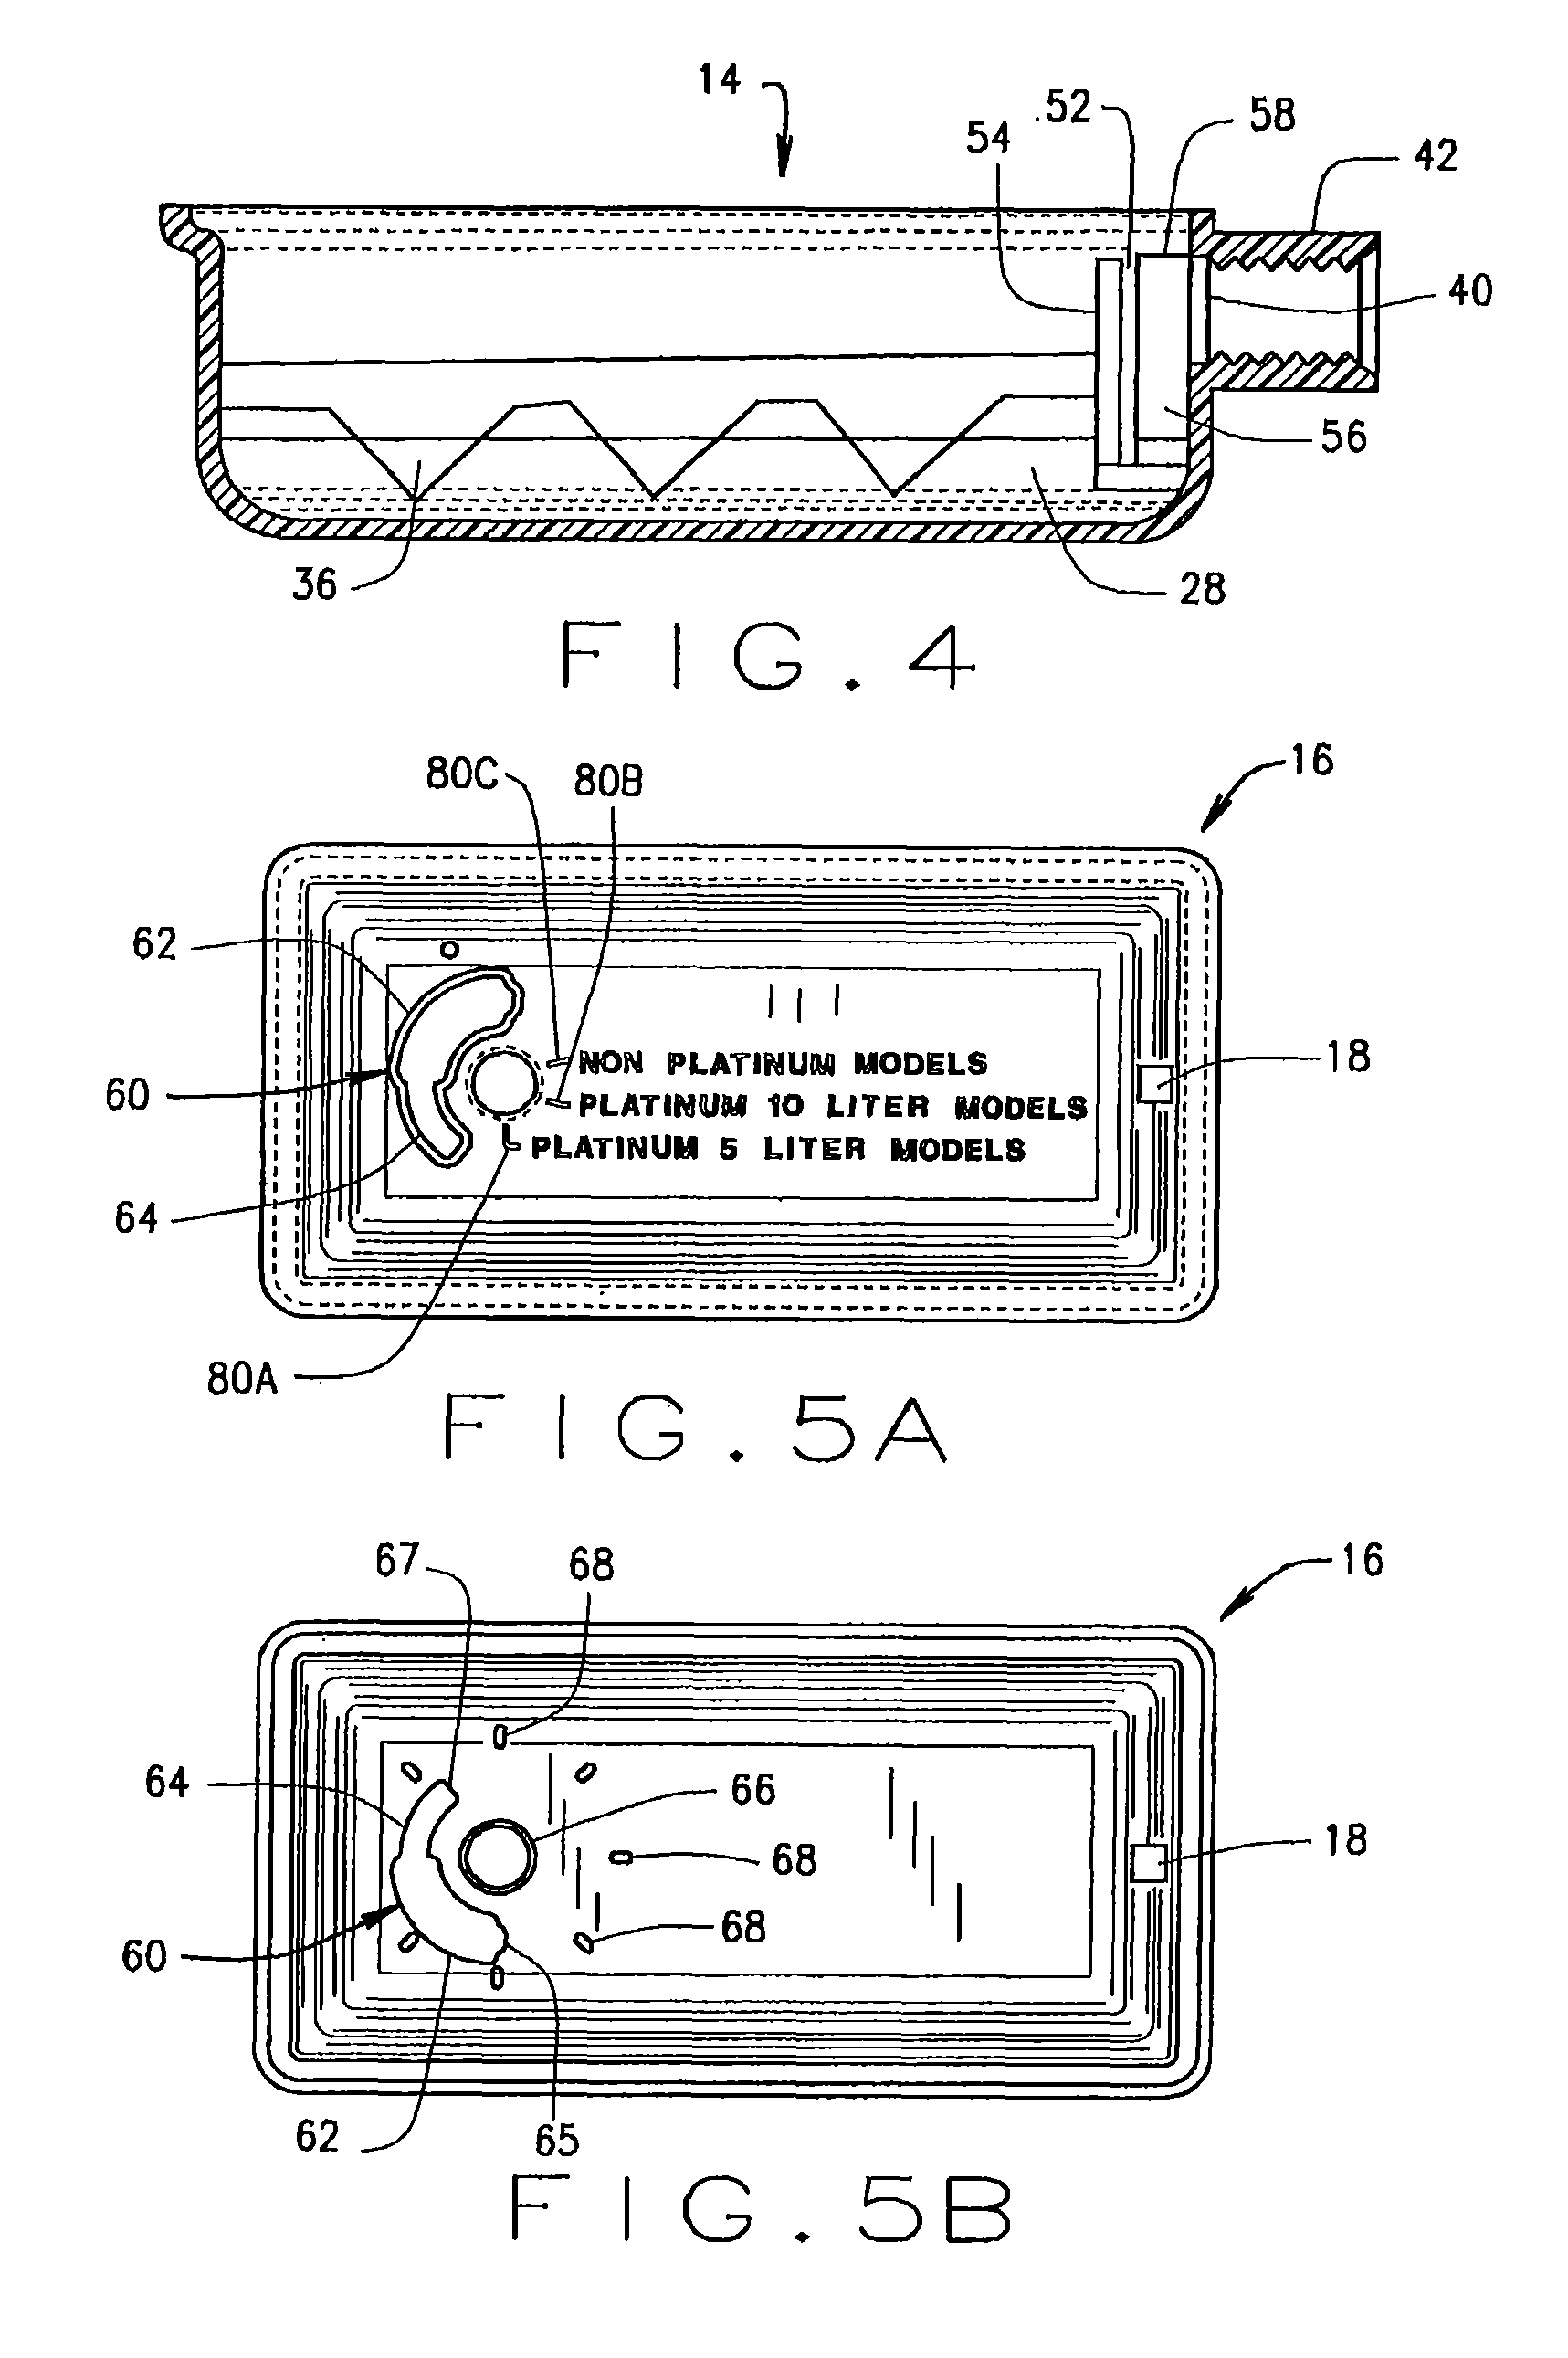 Filter assembly with adjustable inlet opening